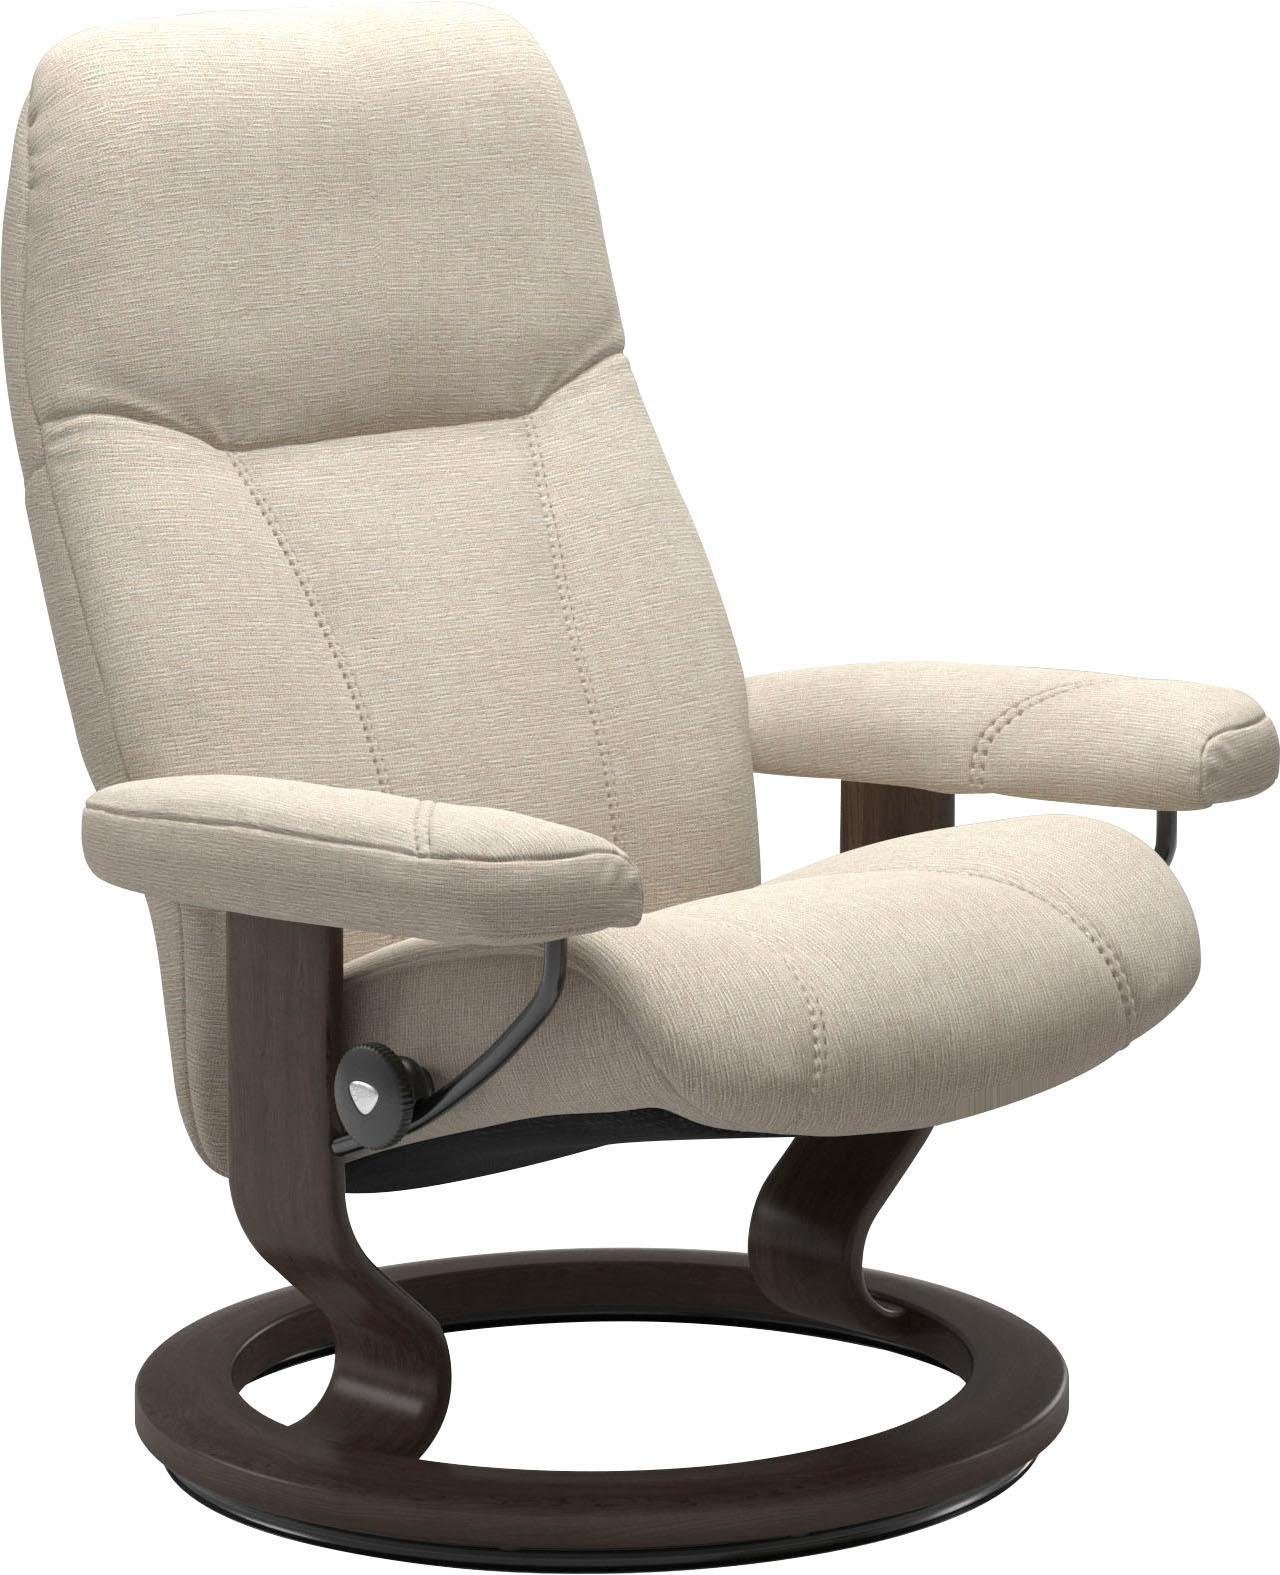 Größe Wenge mit Consul, Gestell Relaxsessel Classic Base, M, Stressless®